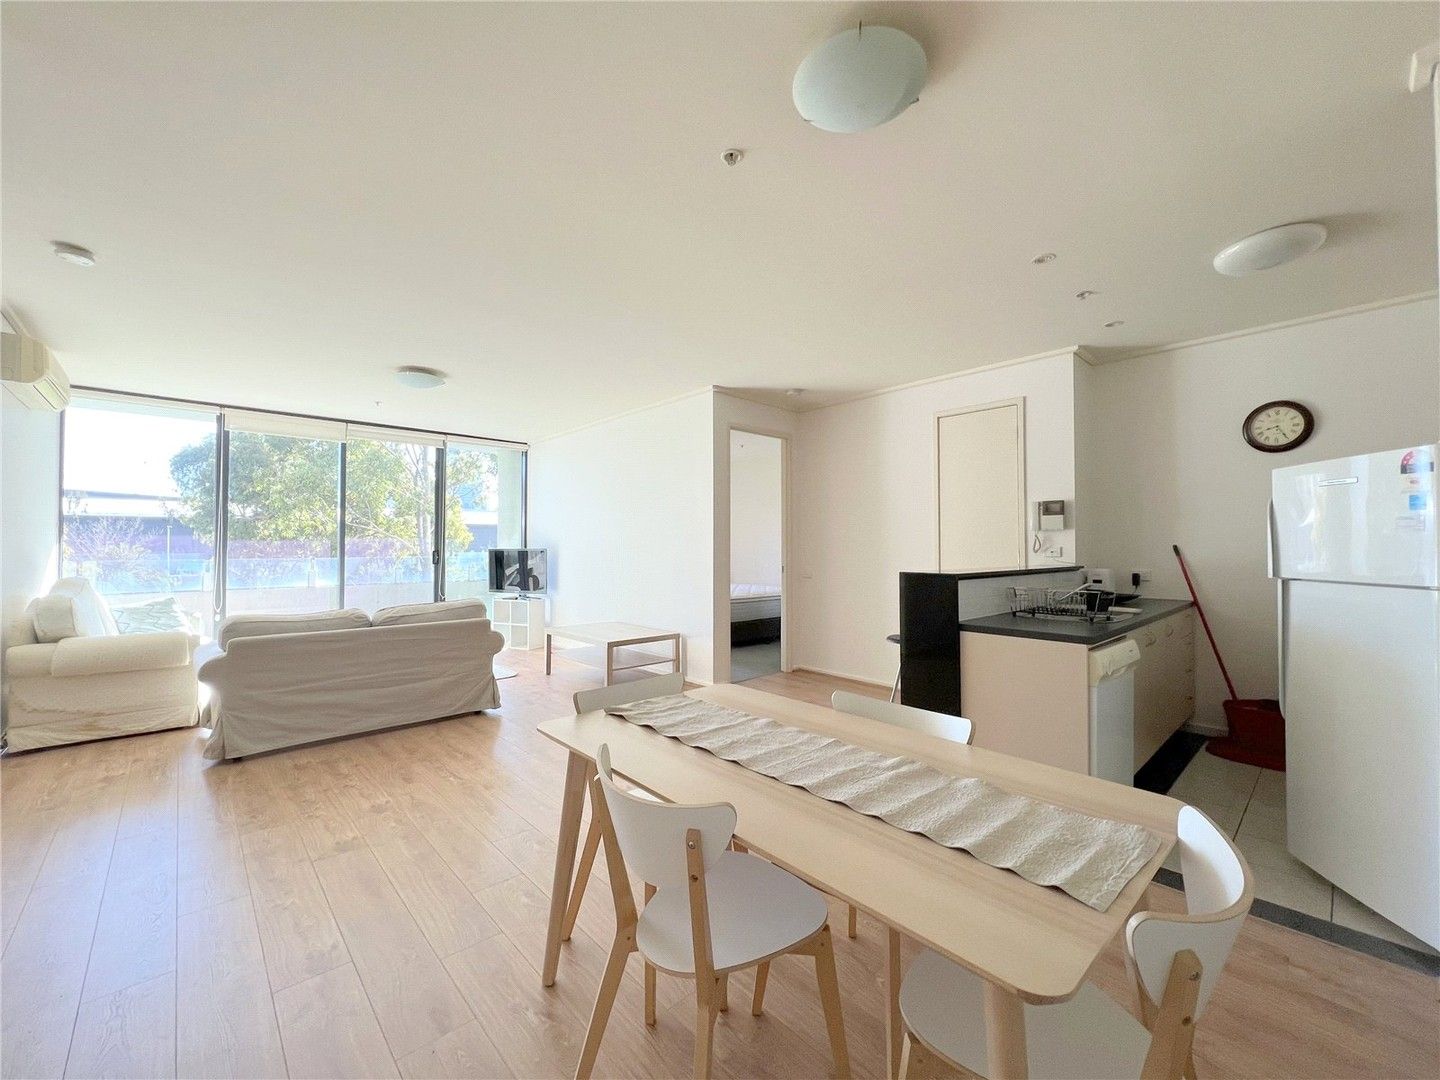 2 bedrooms Apartment / Unit / Flat in 25/83 Whiteman Street SOUTHBANK VIC, 3006